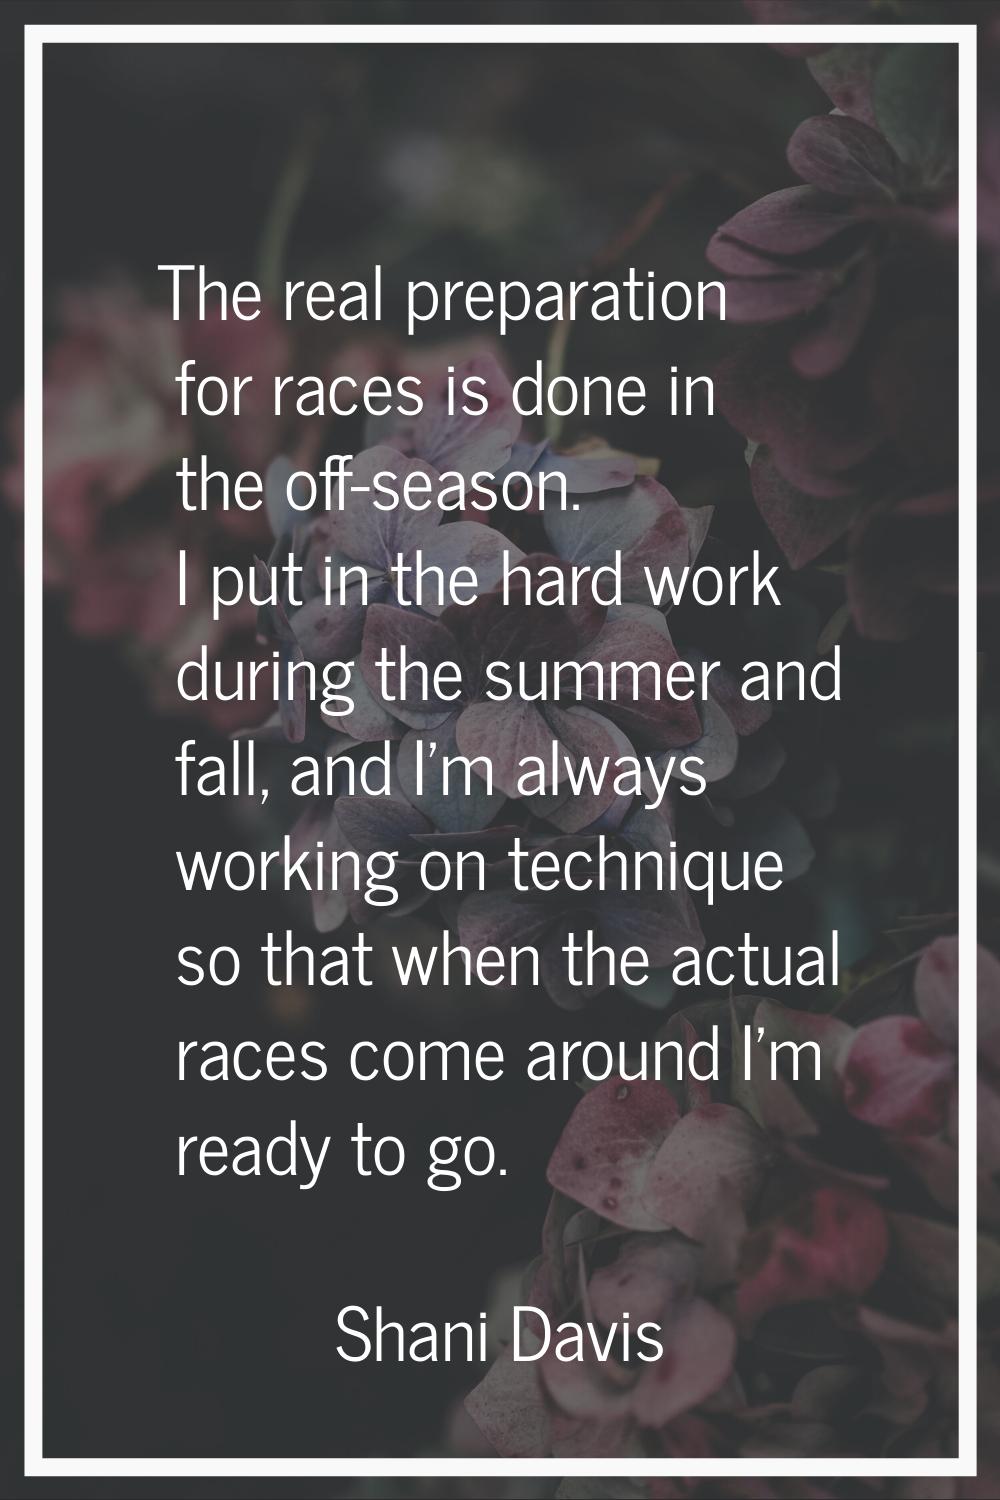 The real preparation for races is done in the off-season. I put in the hard work during the summer 